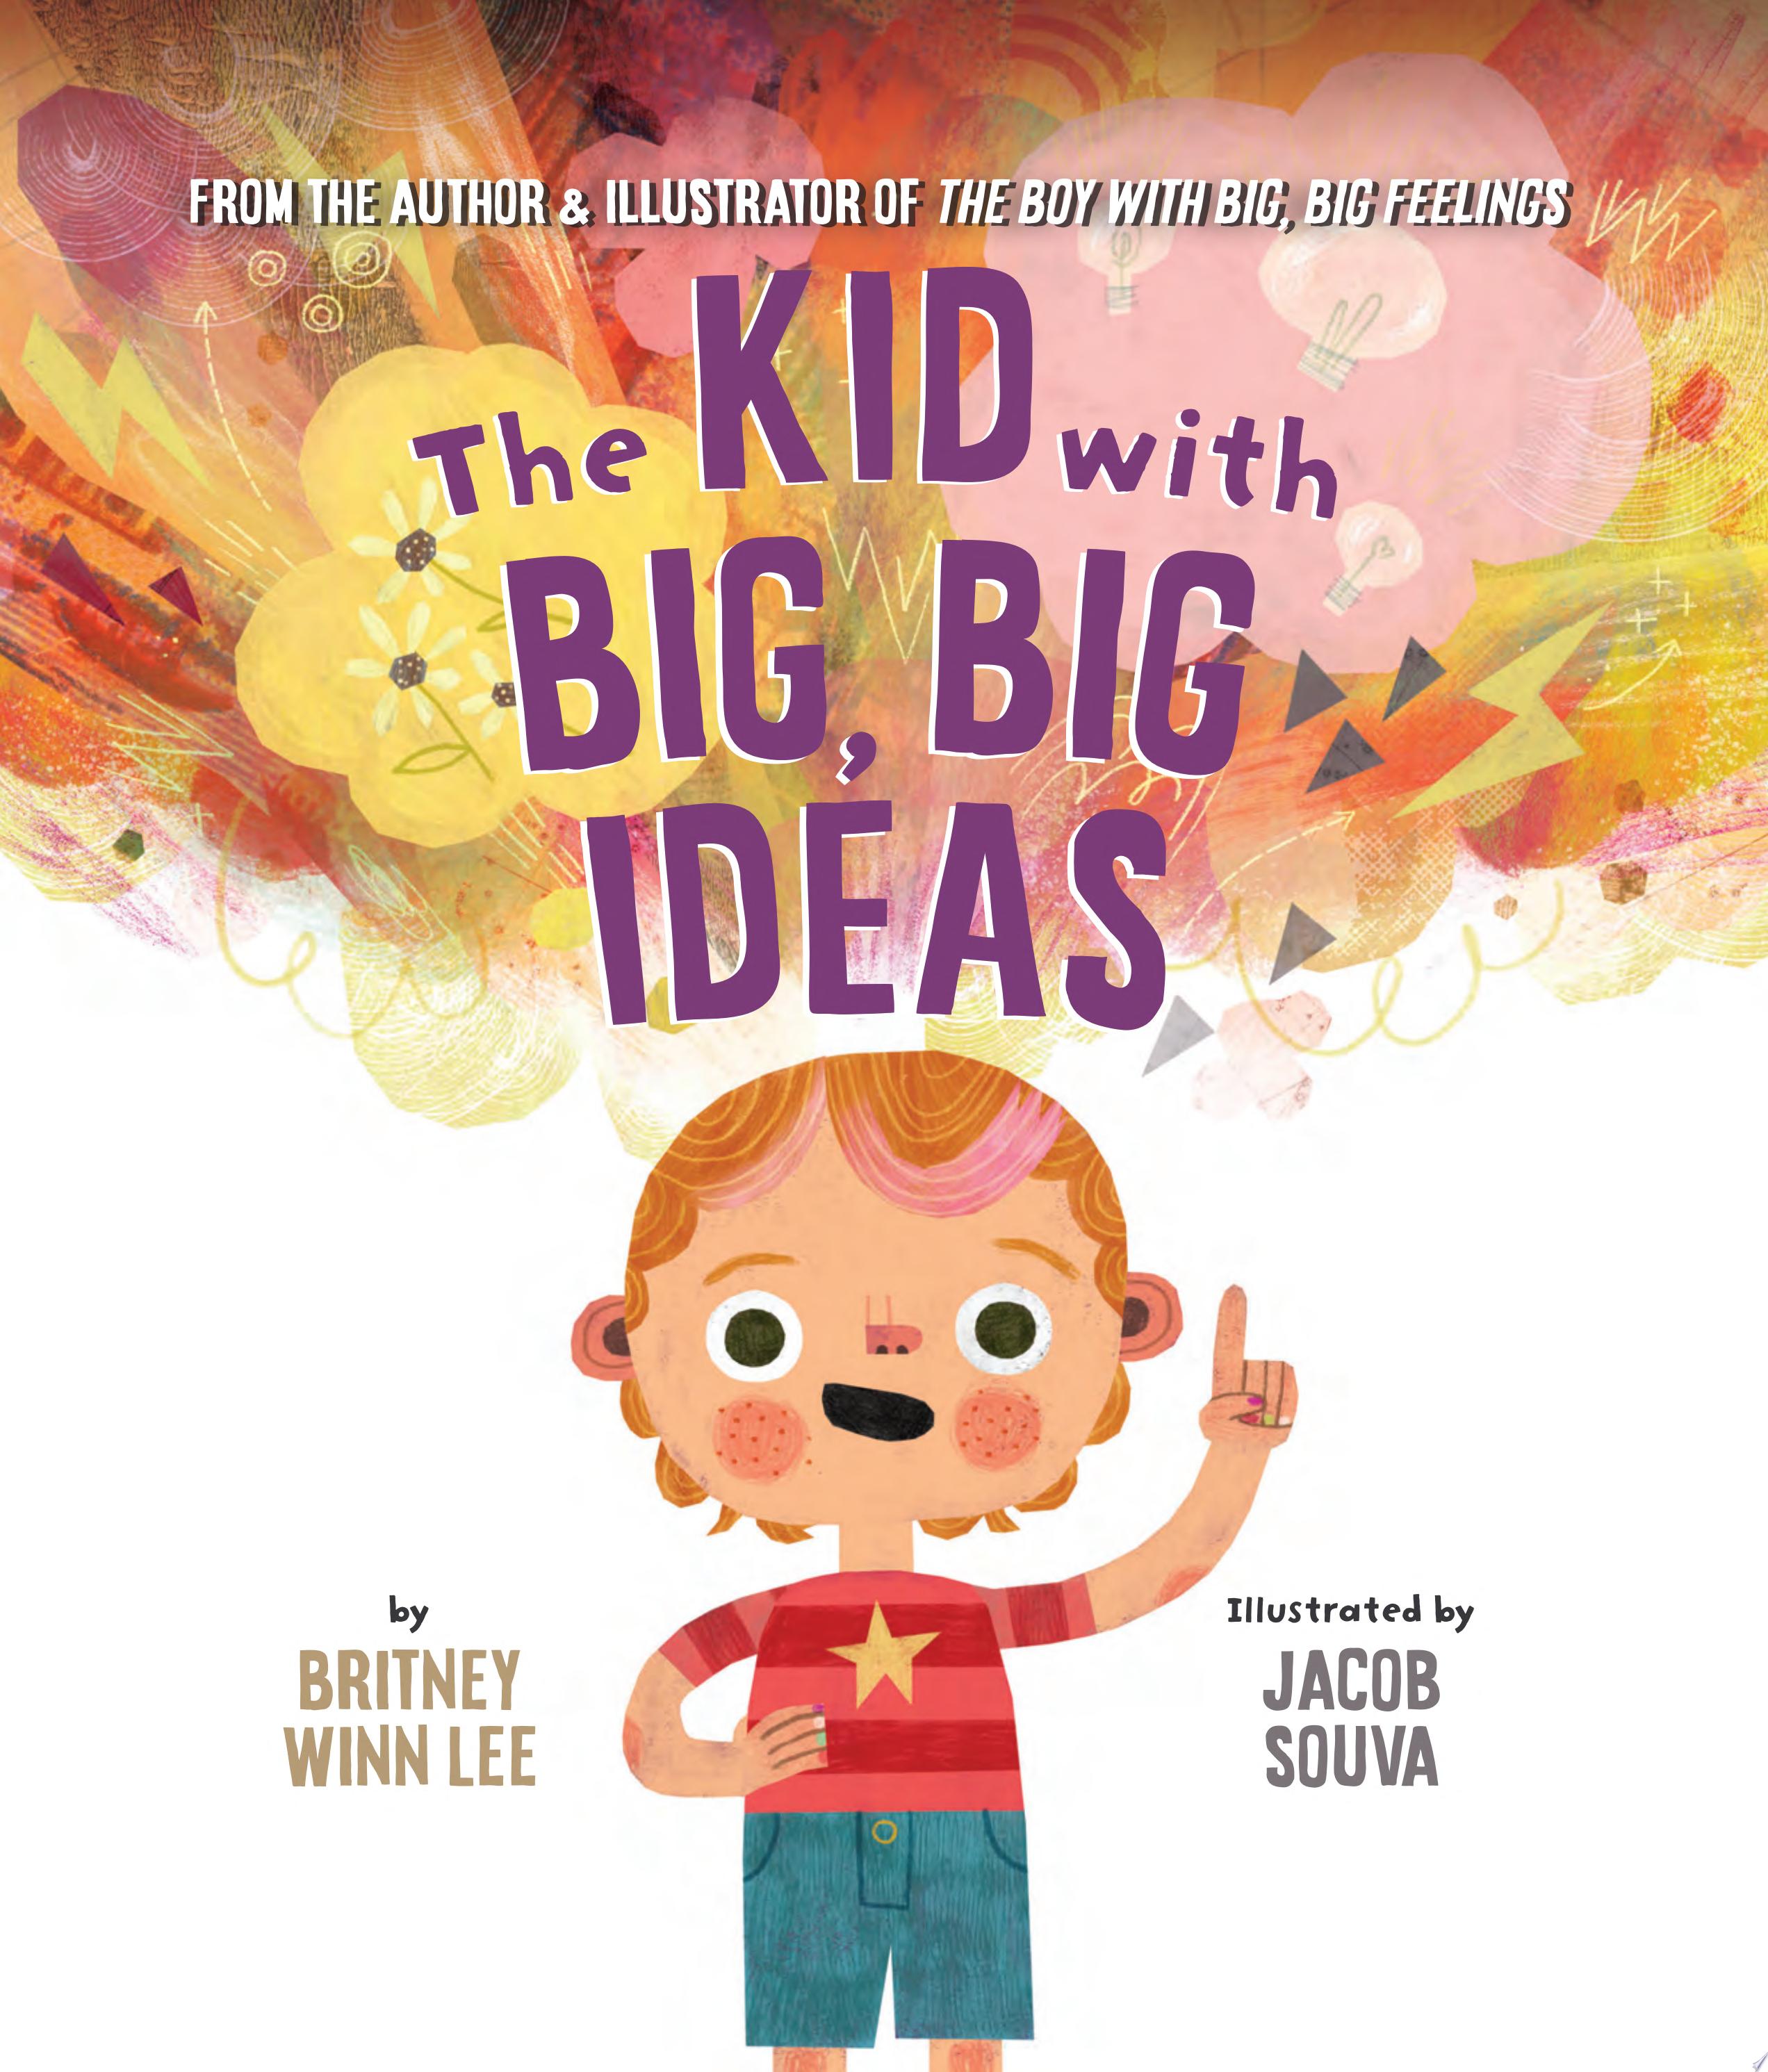 Image for "The Kid with Big, Big Ideas"